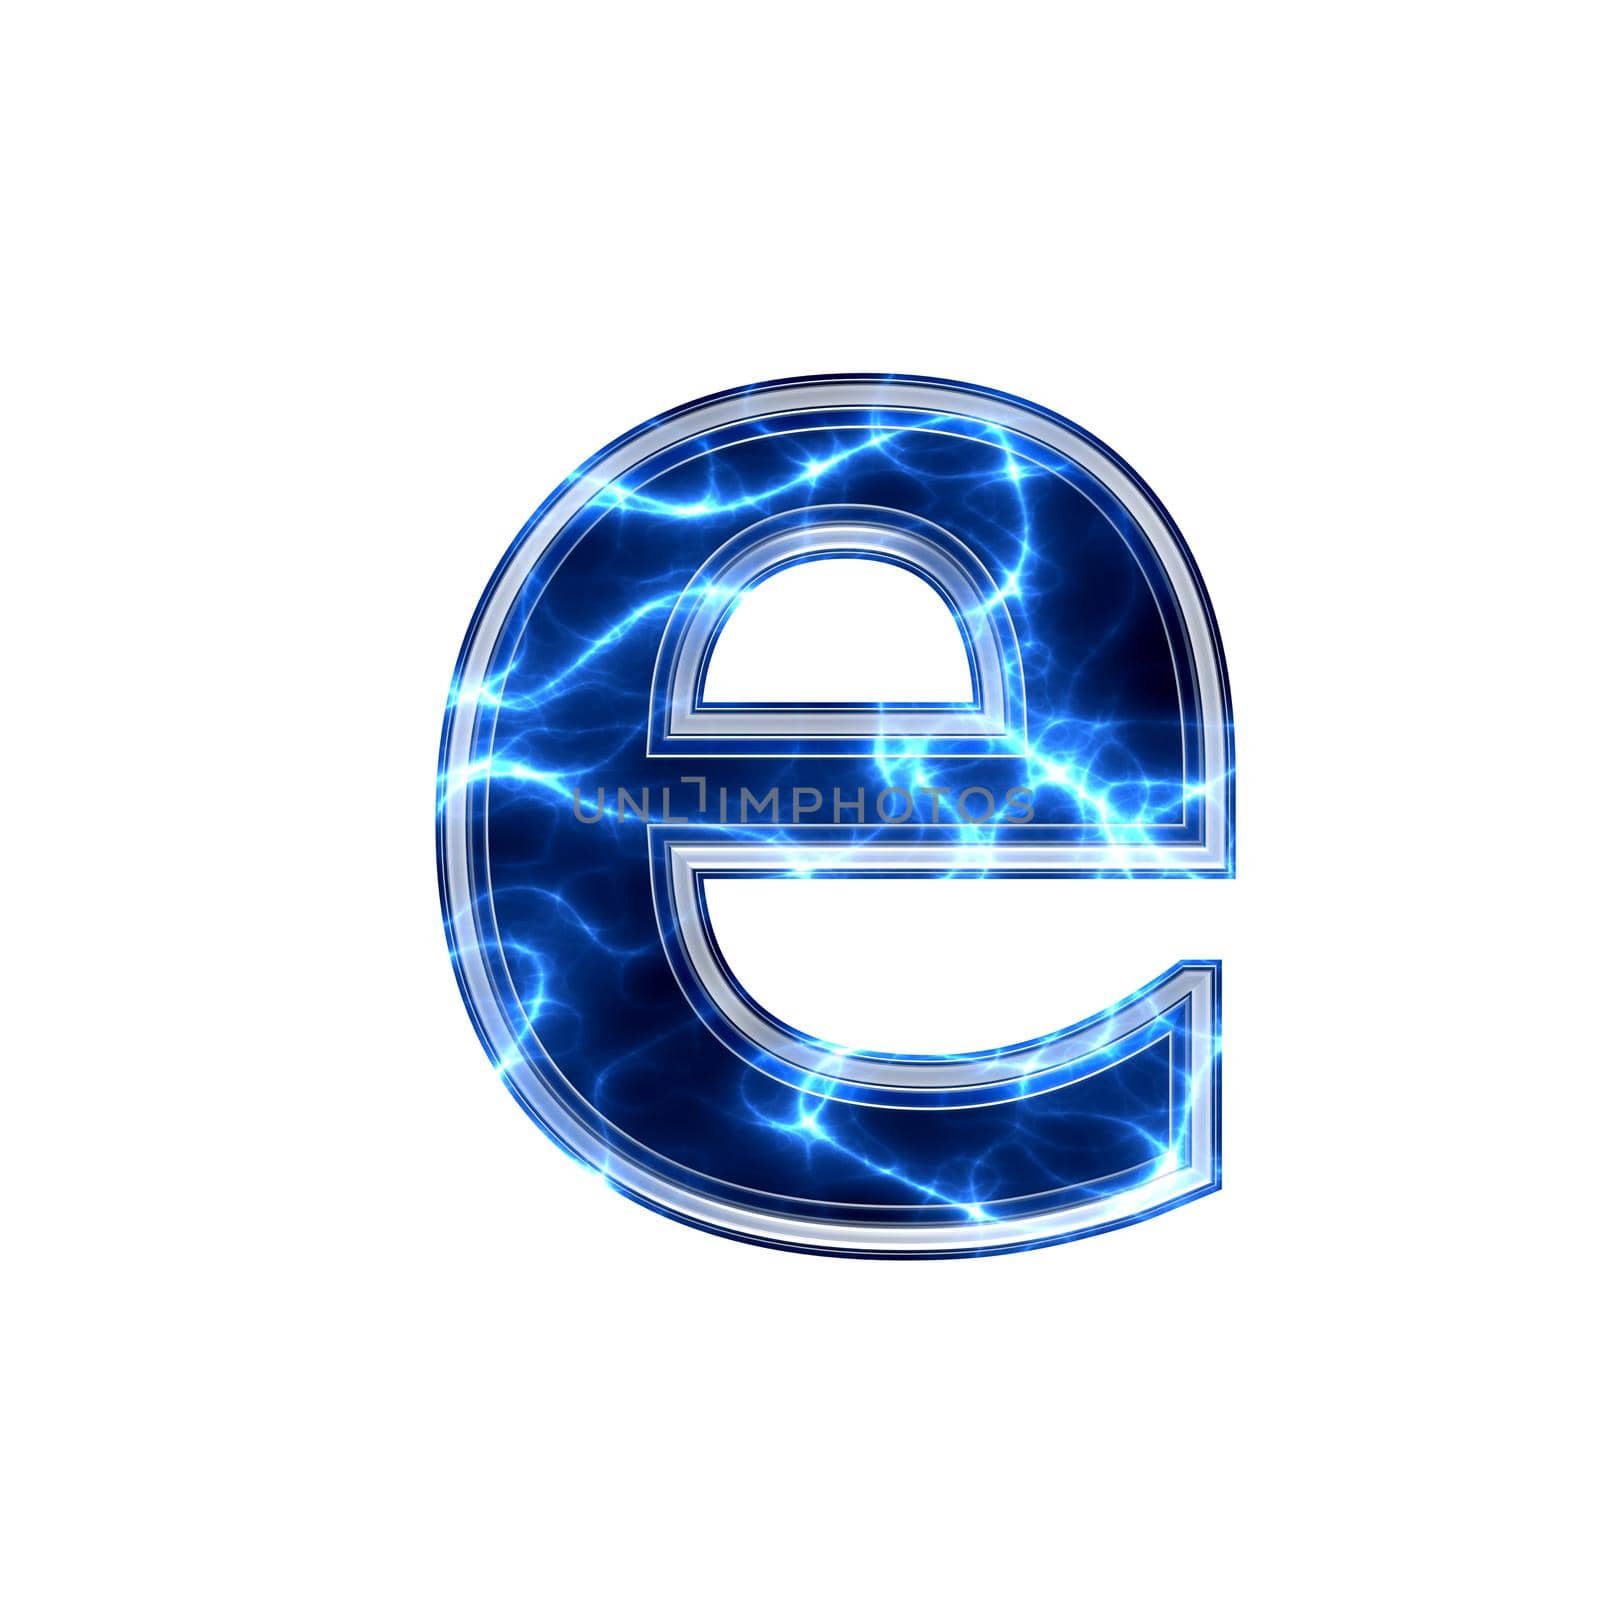 electric 3d letter by chrisroll